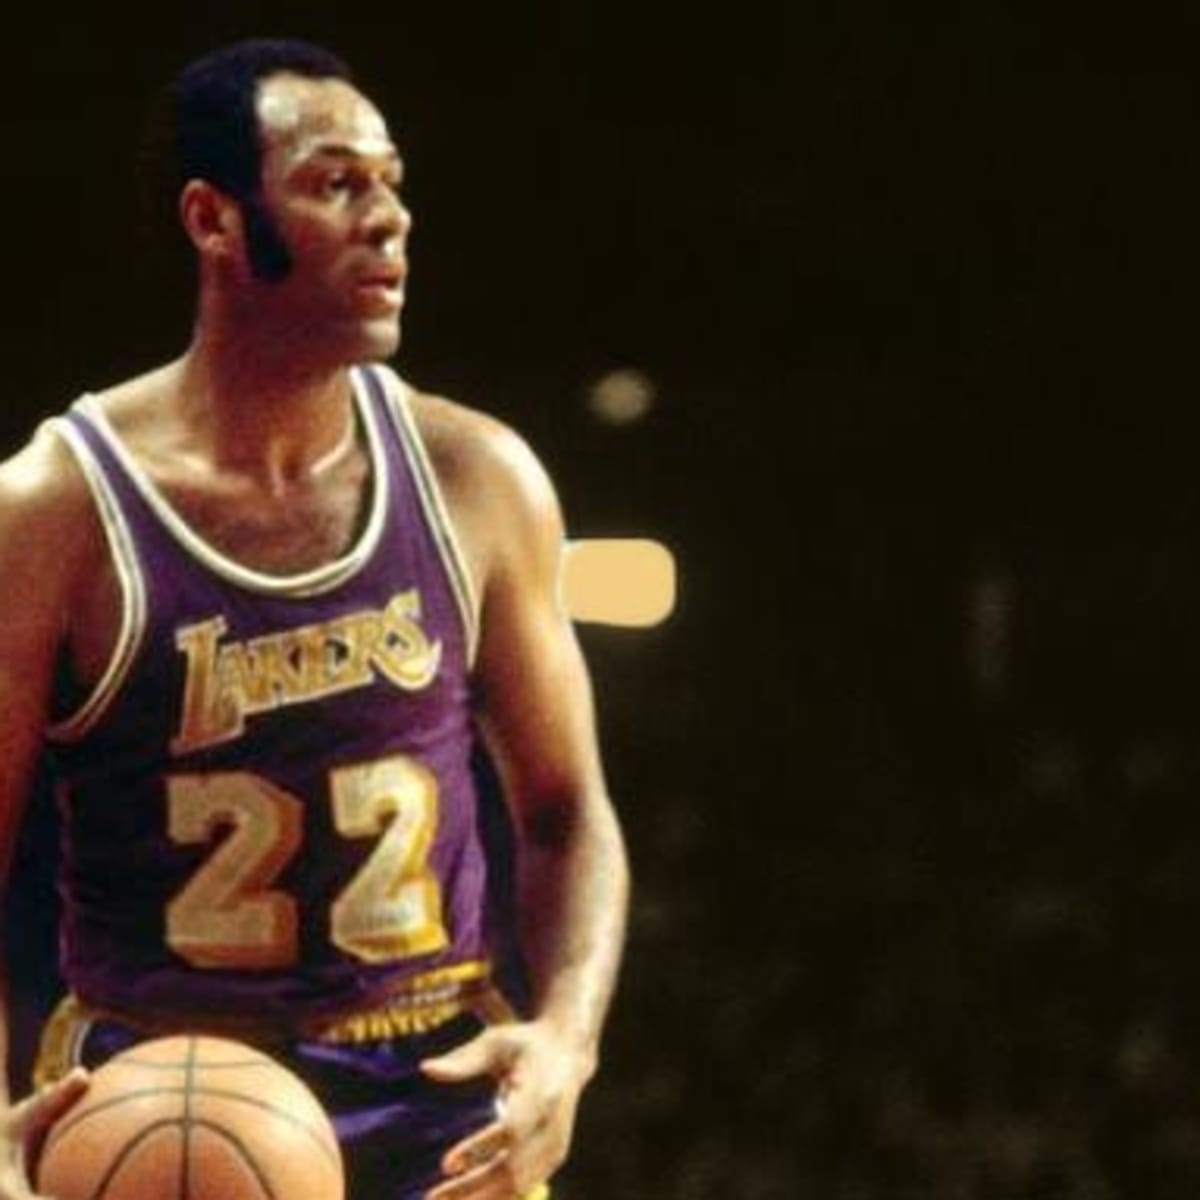 NBA Buzz - 62 years ago today, Elgin Baylor dropped 72 PTS